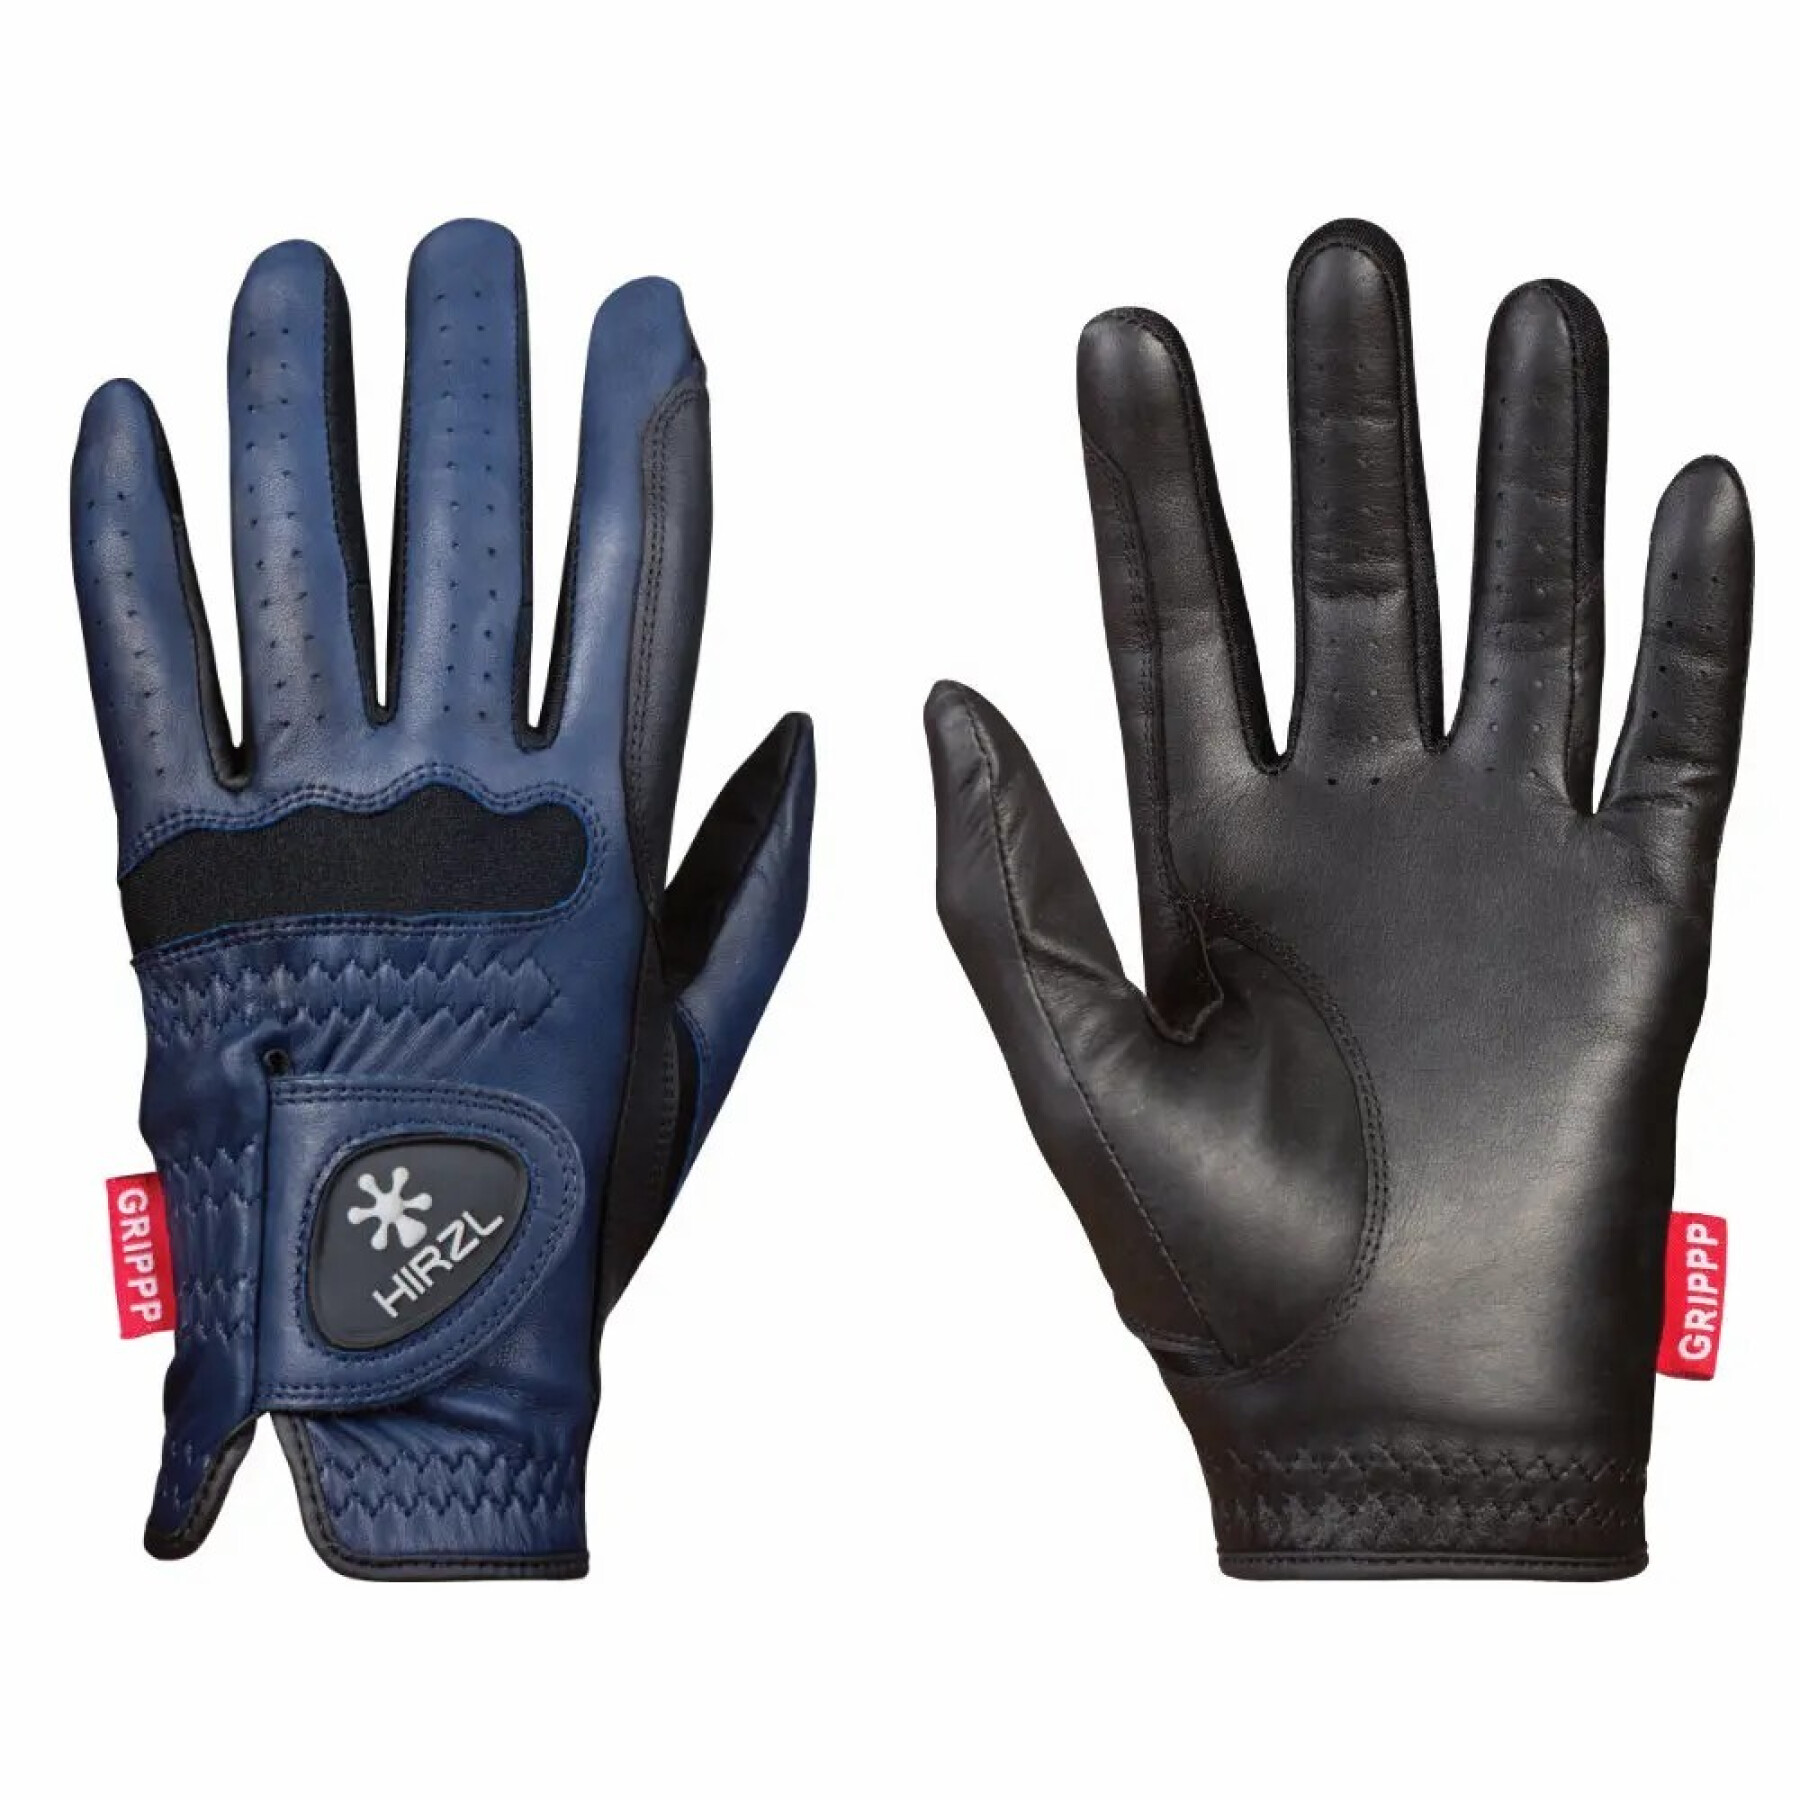 Leather riding gloves Hirzl Grippp Elite (x2)